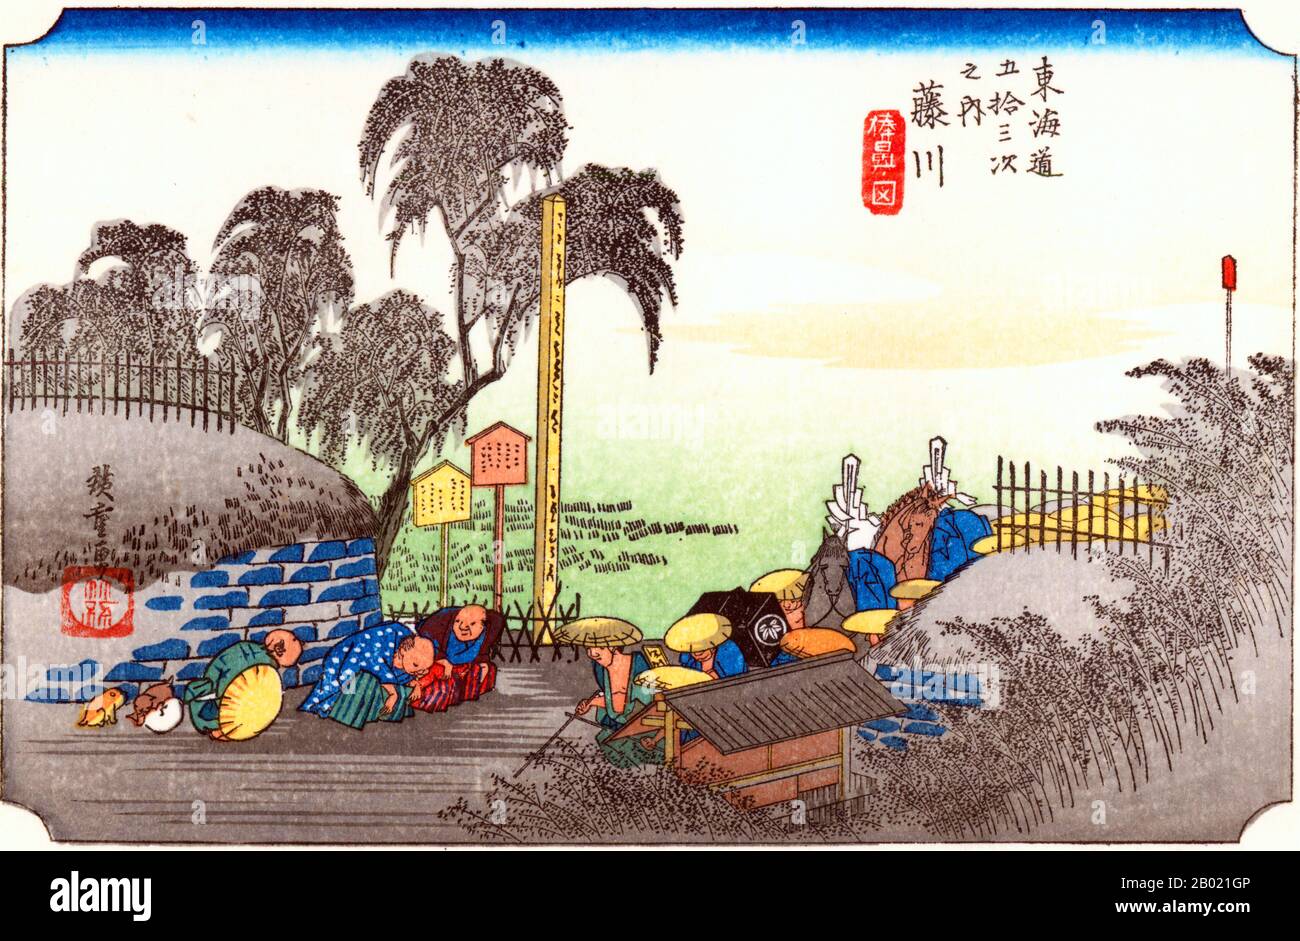 Fujikawa: The head of a daimyo's procession at the entrance to a village, and three peasants making obeisance as it passes. The most frequent user of the highway was the feudal lord with his retinue. Commoners who came across the procession had to kneel down on the ground to pay their respects and stay there until the procession had passed.  Utagawa Hiroshige (歌川 広重, 1797 – October 12, 1858) was a Japanese ukiyo-e artist, and one of the last great artists in that tradition. He was also referred to as Andō Hiroshige (安藤 広重) (an irregular combination of family name and art name) and by the art n Stock Photo